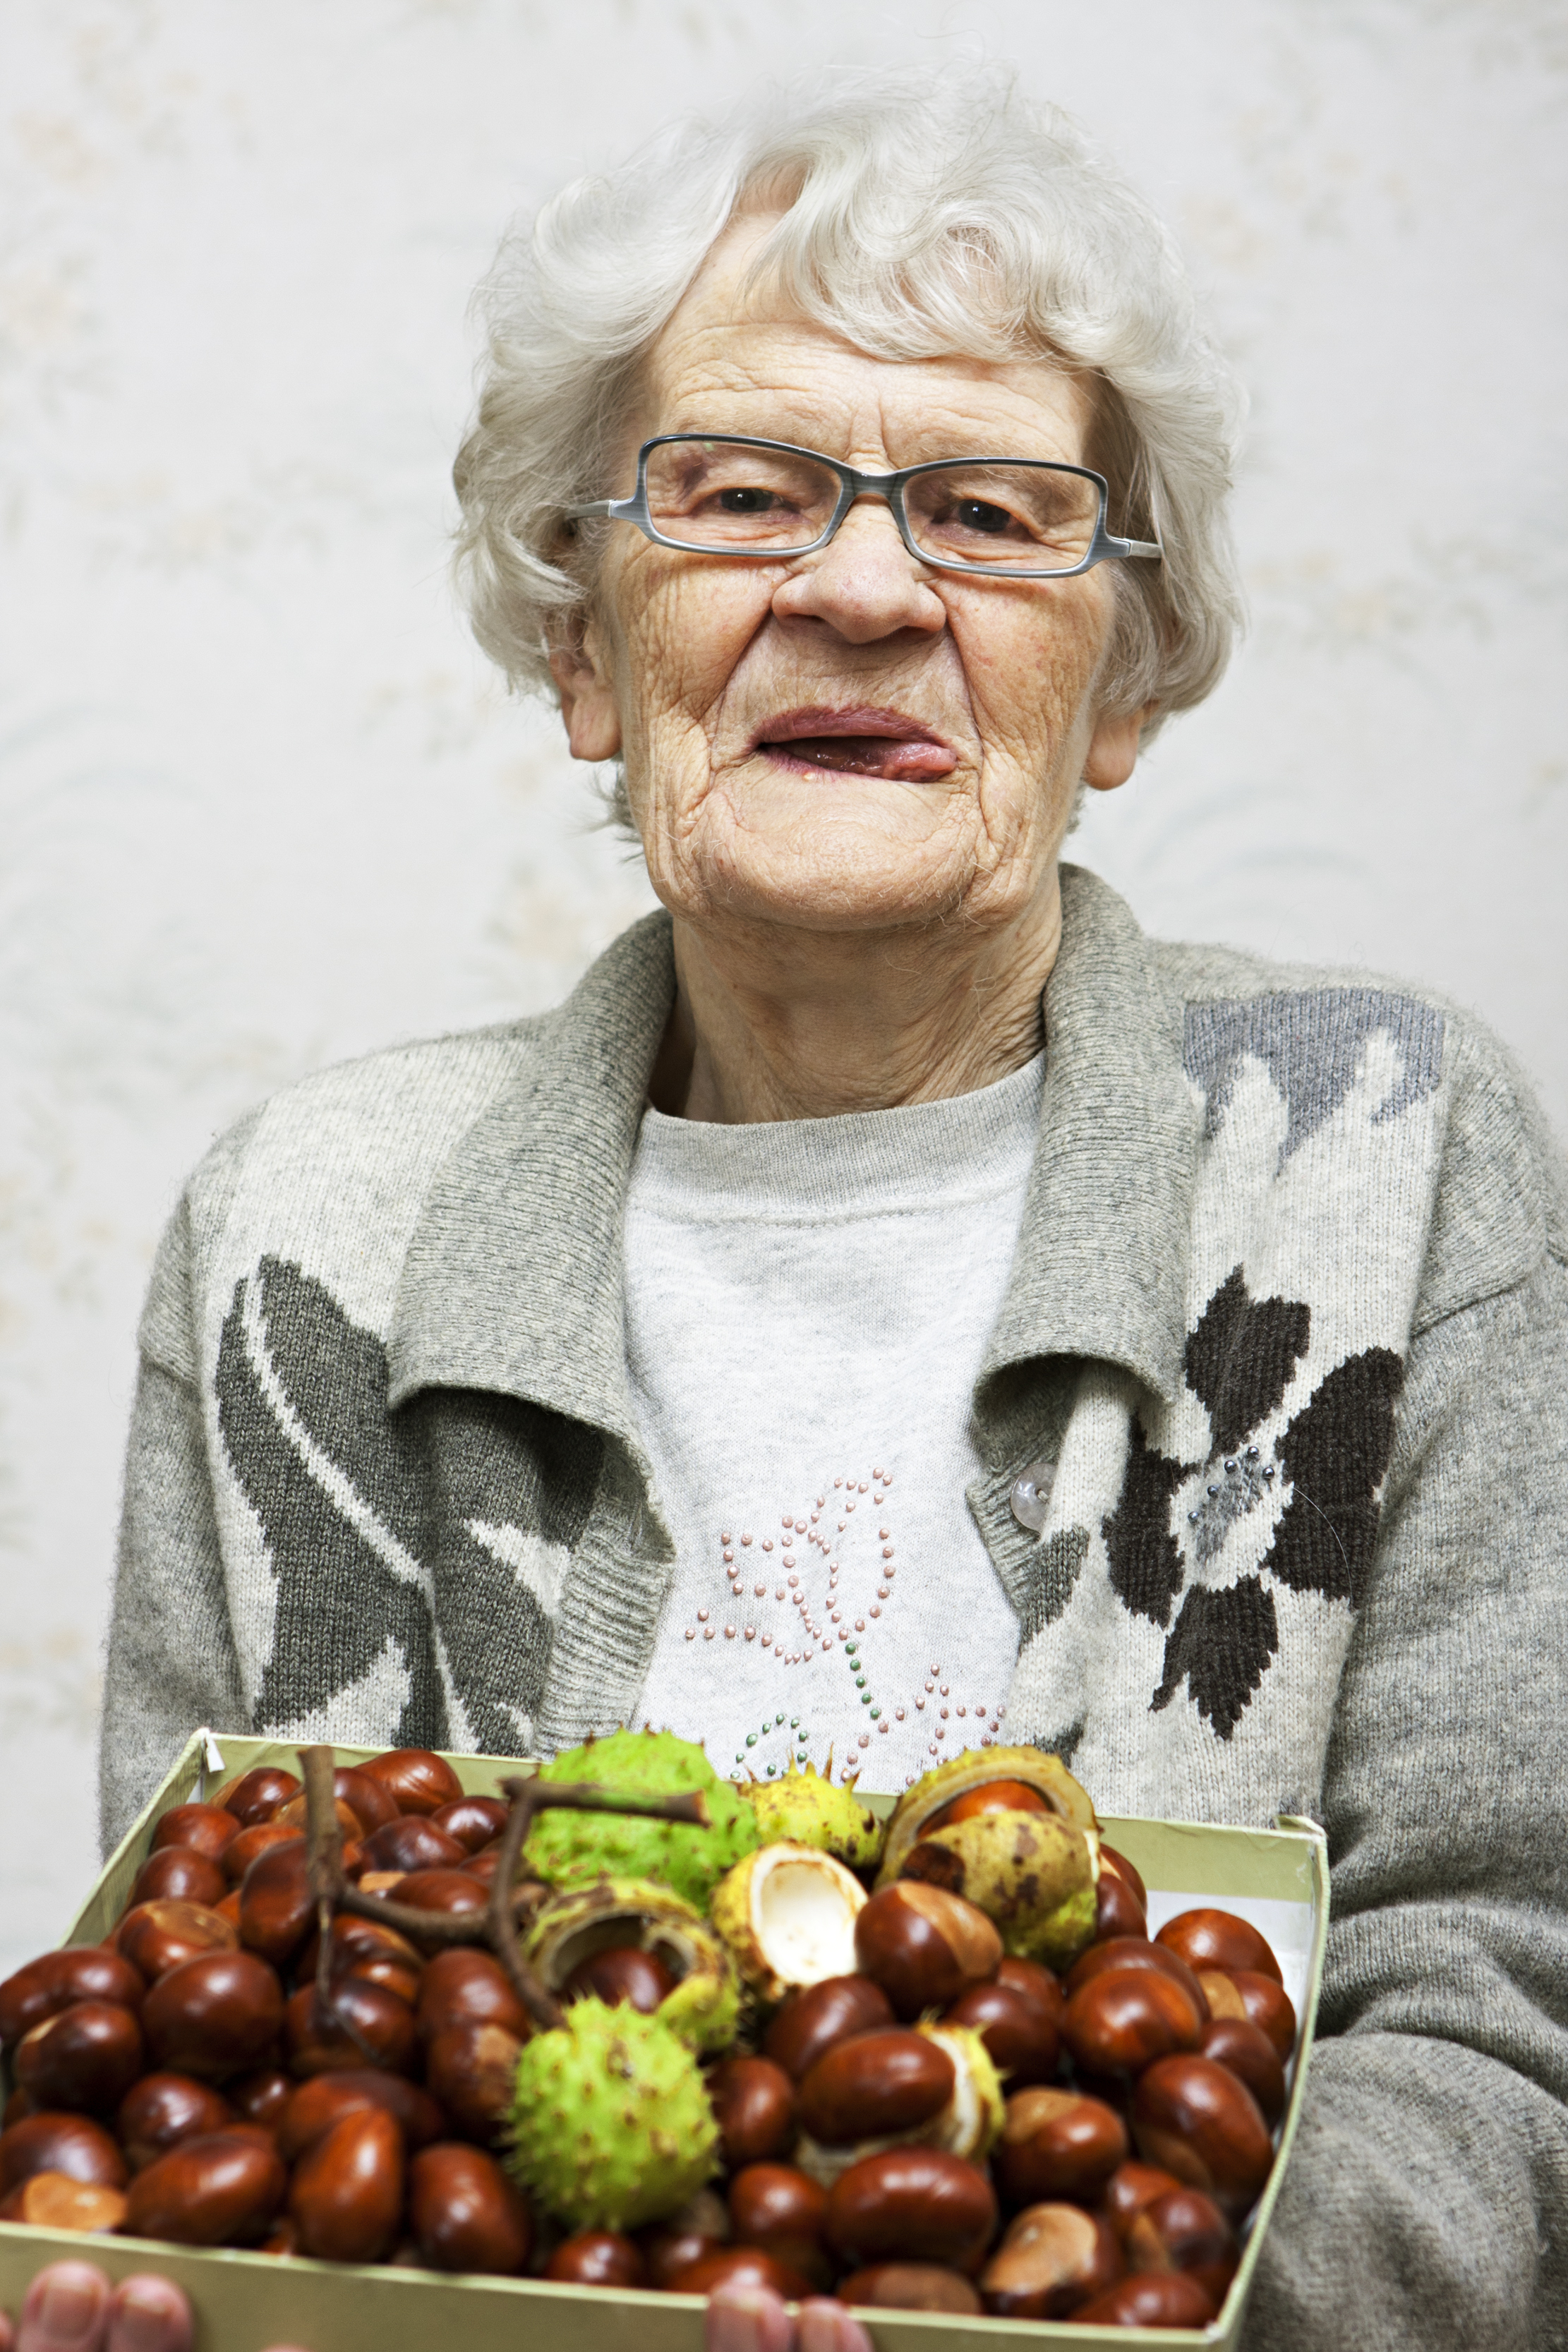 Elderly woman smiling, holding a tray of chestnuts